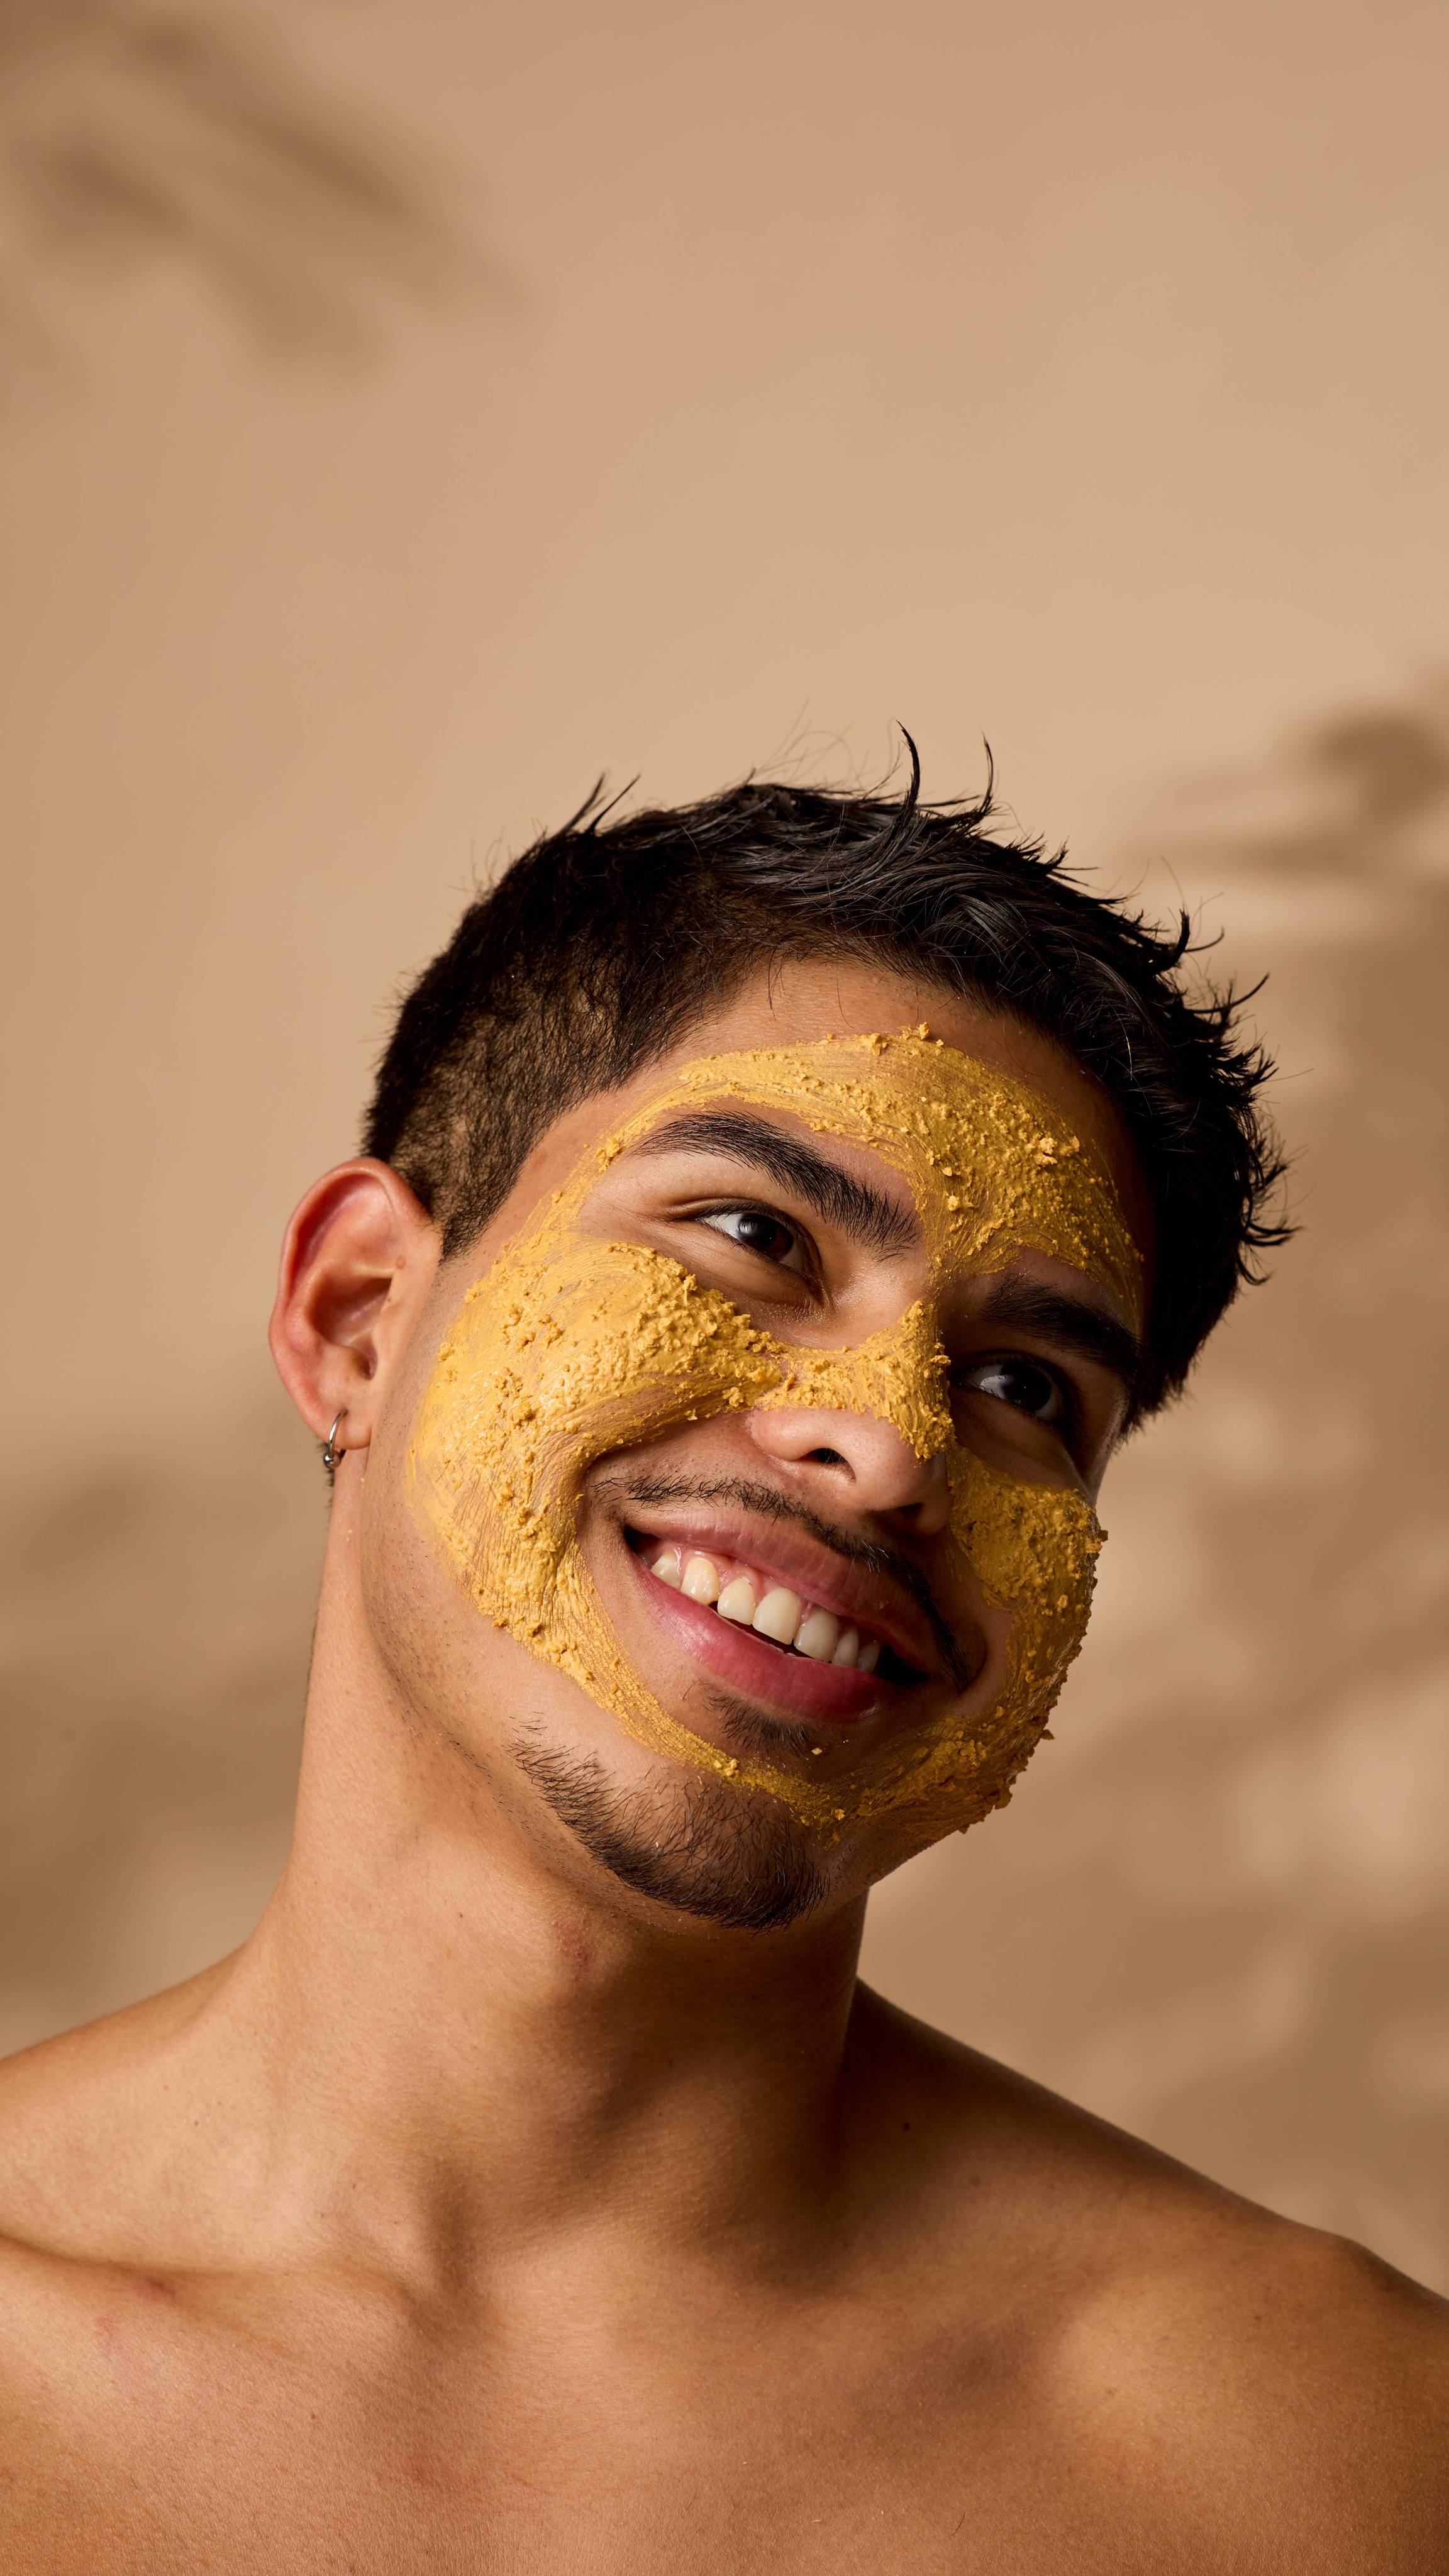 The image shows the model smiling into the distance as their skin is coated with the Turmeric face mask.